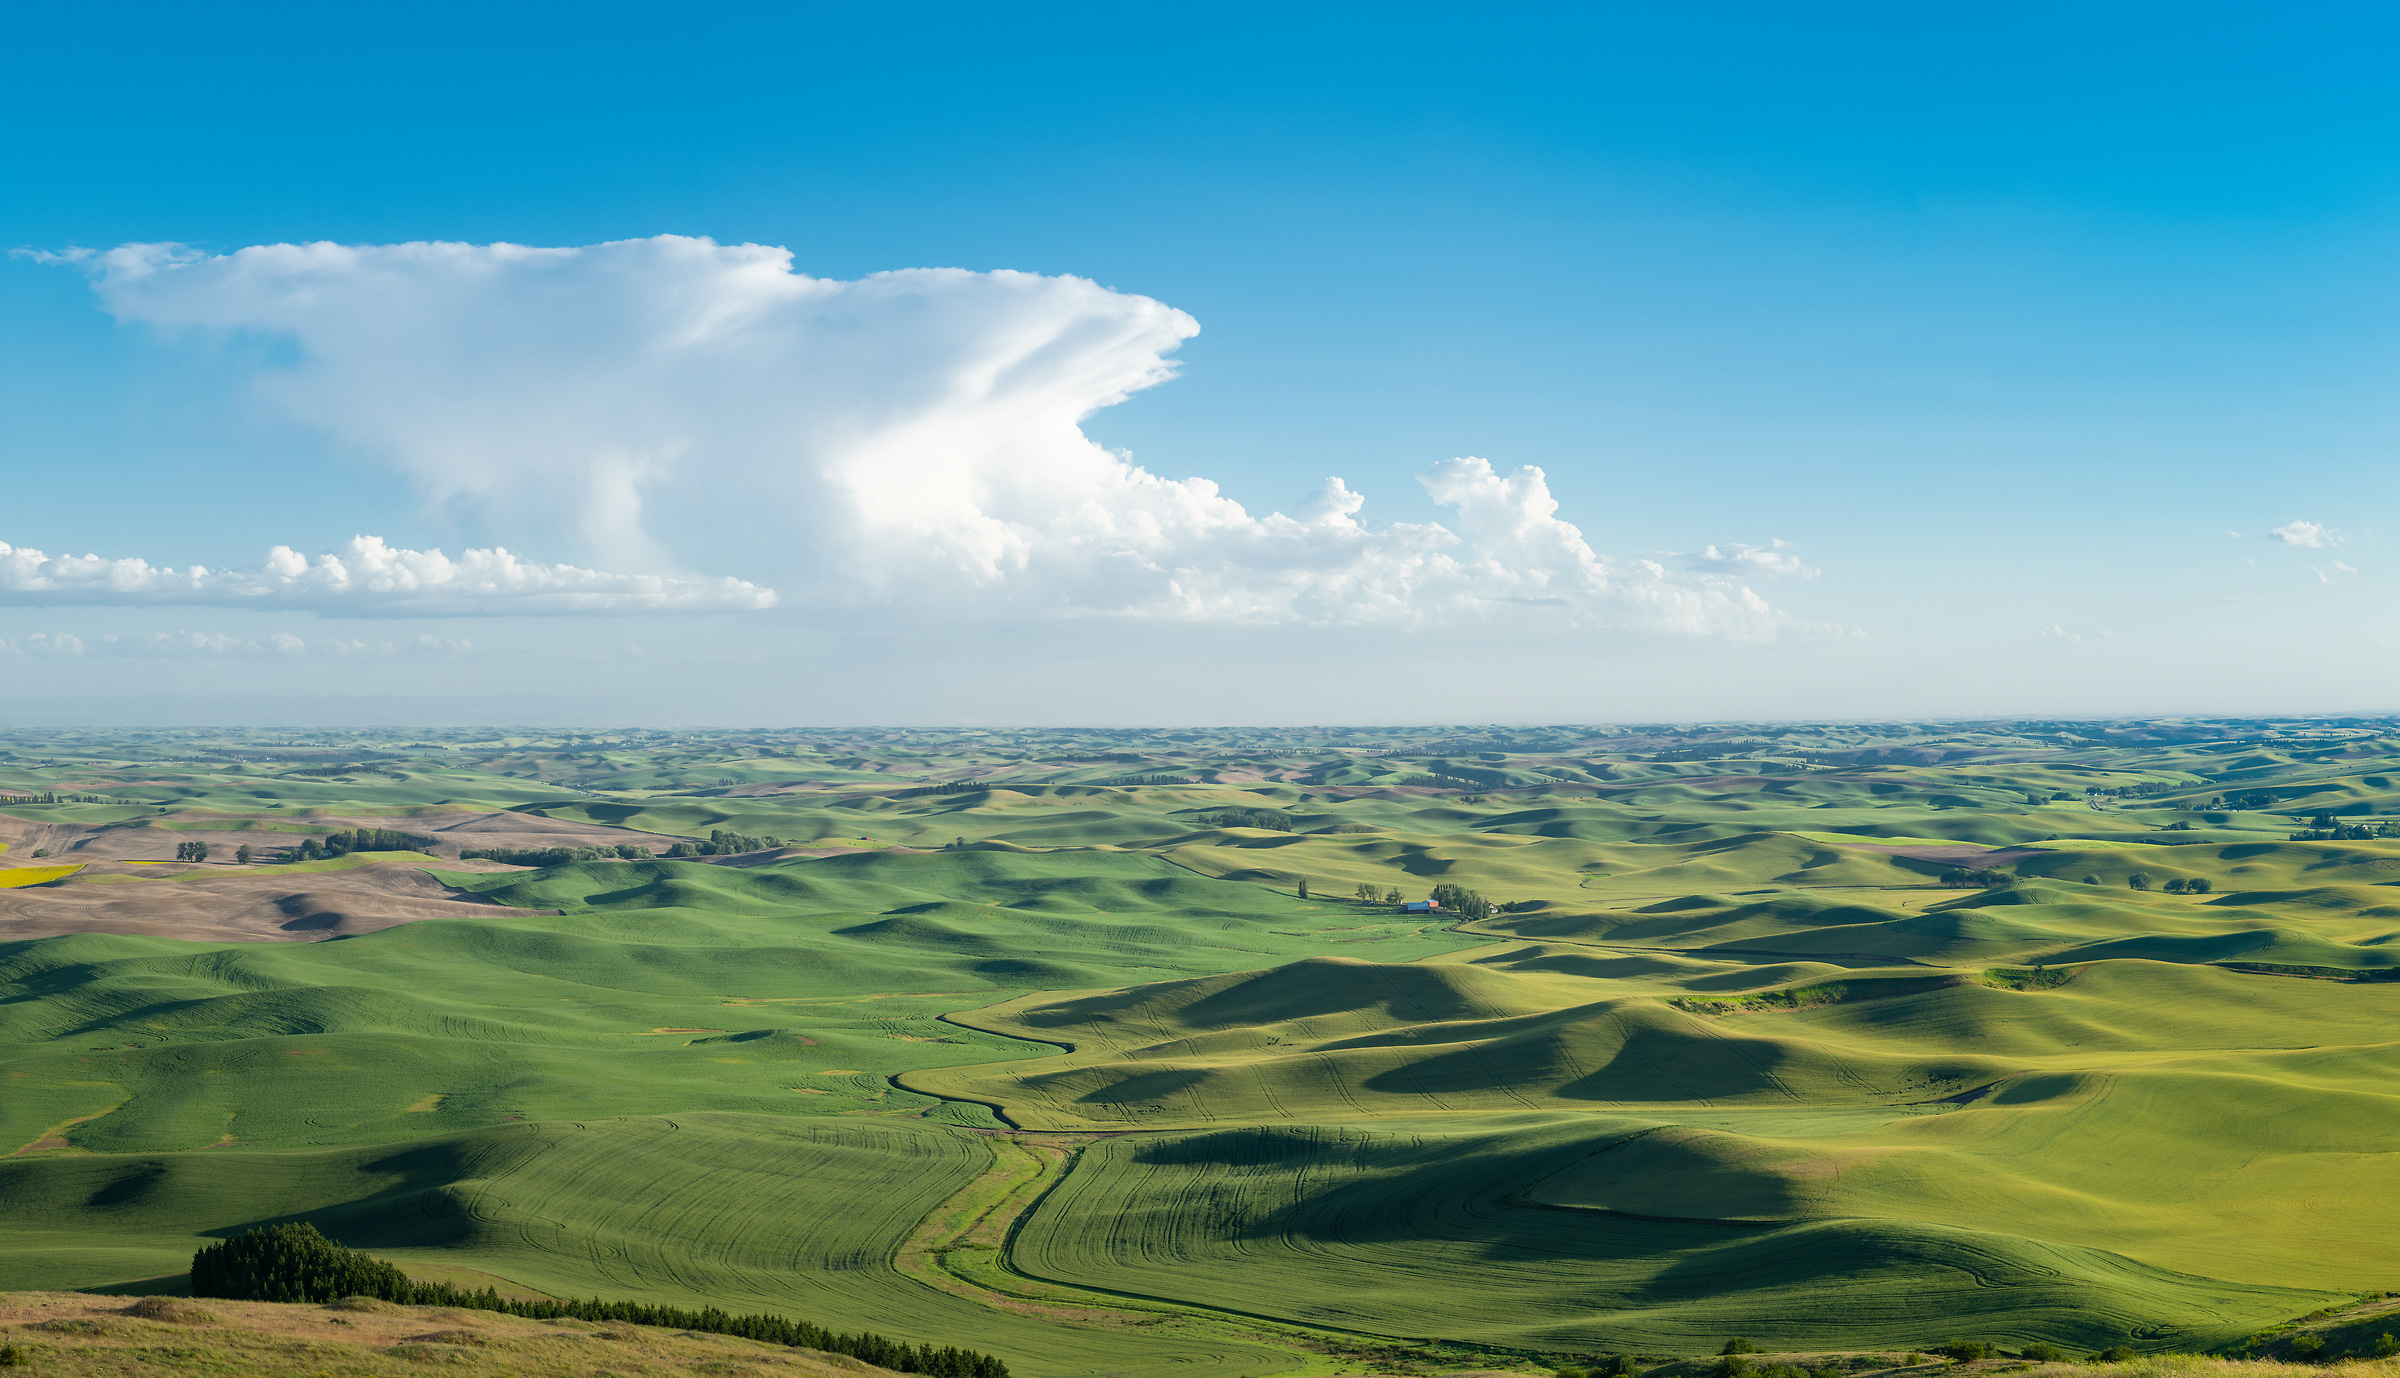 355 megapixels! A very high resolution, large-format VAST photo print farms; landscape photograph created by Greg Probst in Steptoe Butte State Park, Washington